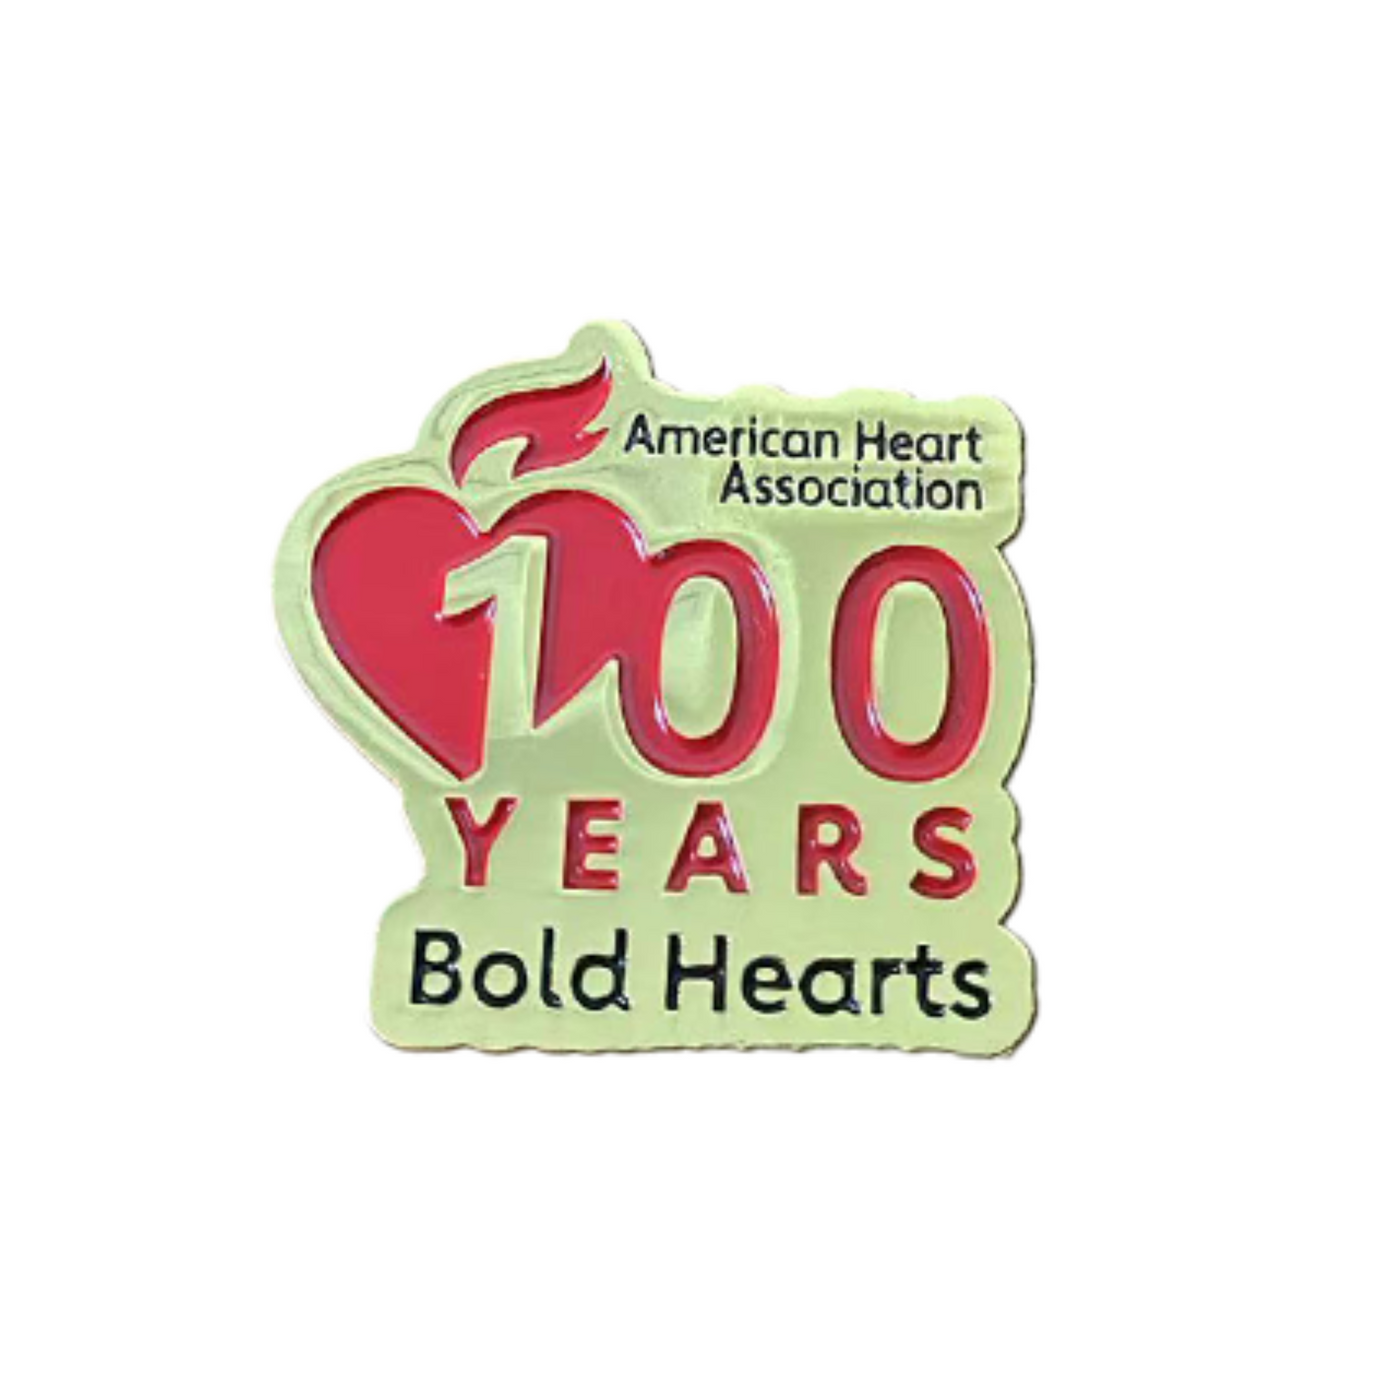 lapel pin of AHA Bold Hearts 100 Years logo, gold with red and black recessed design